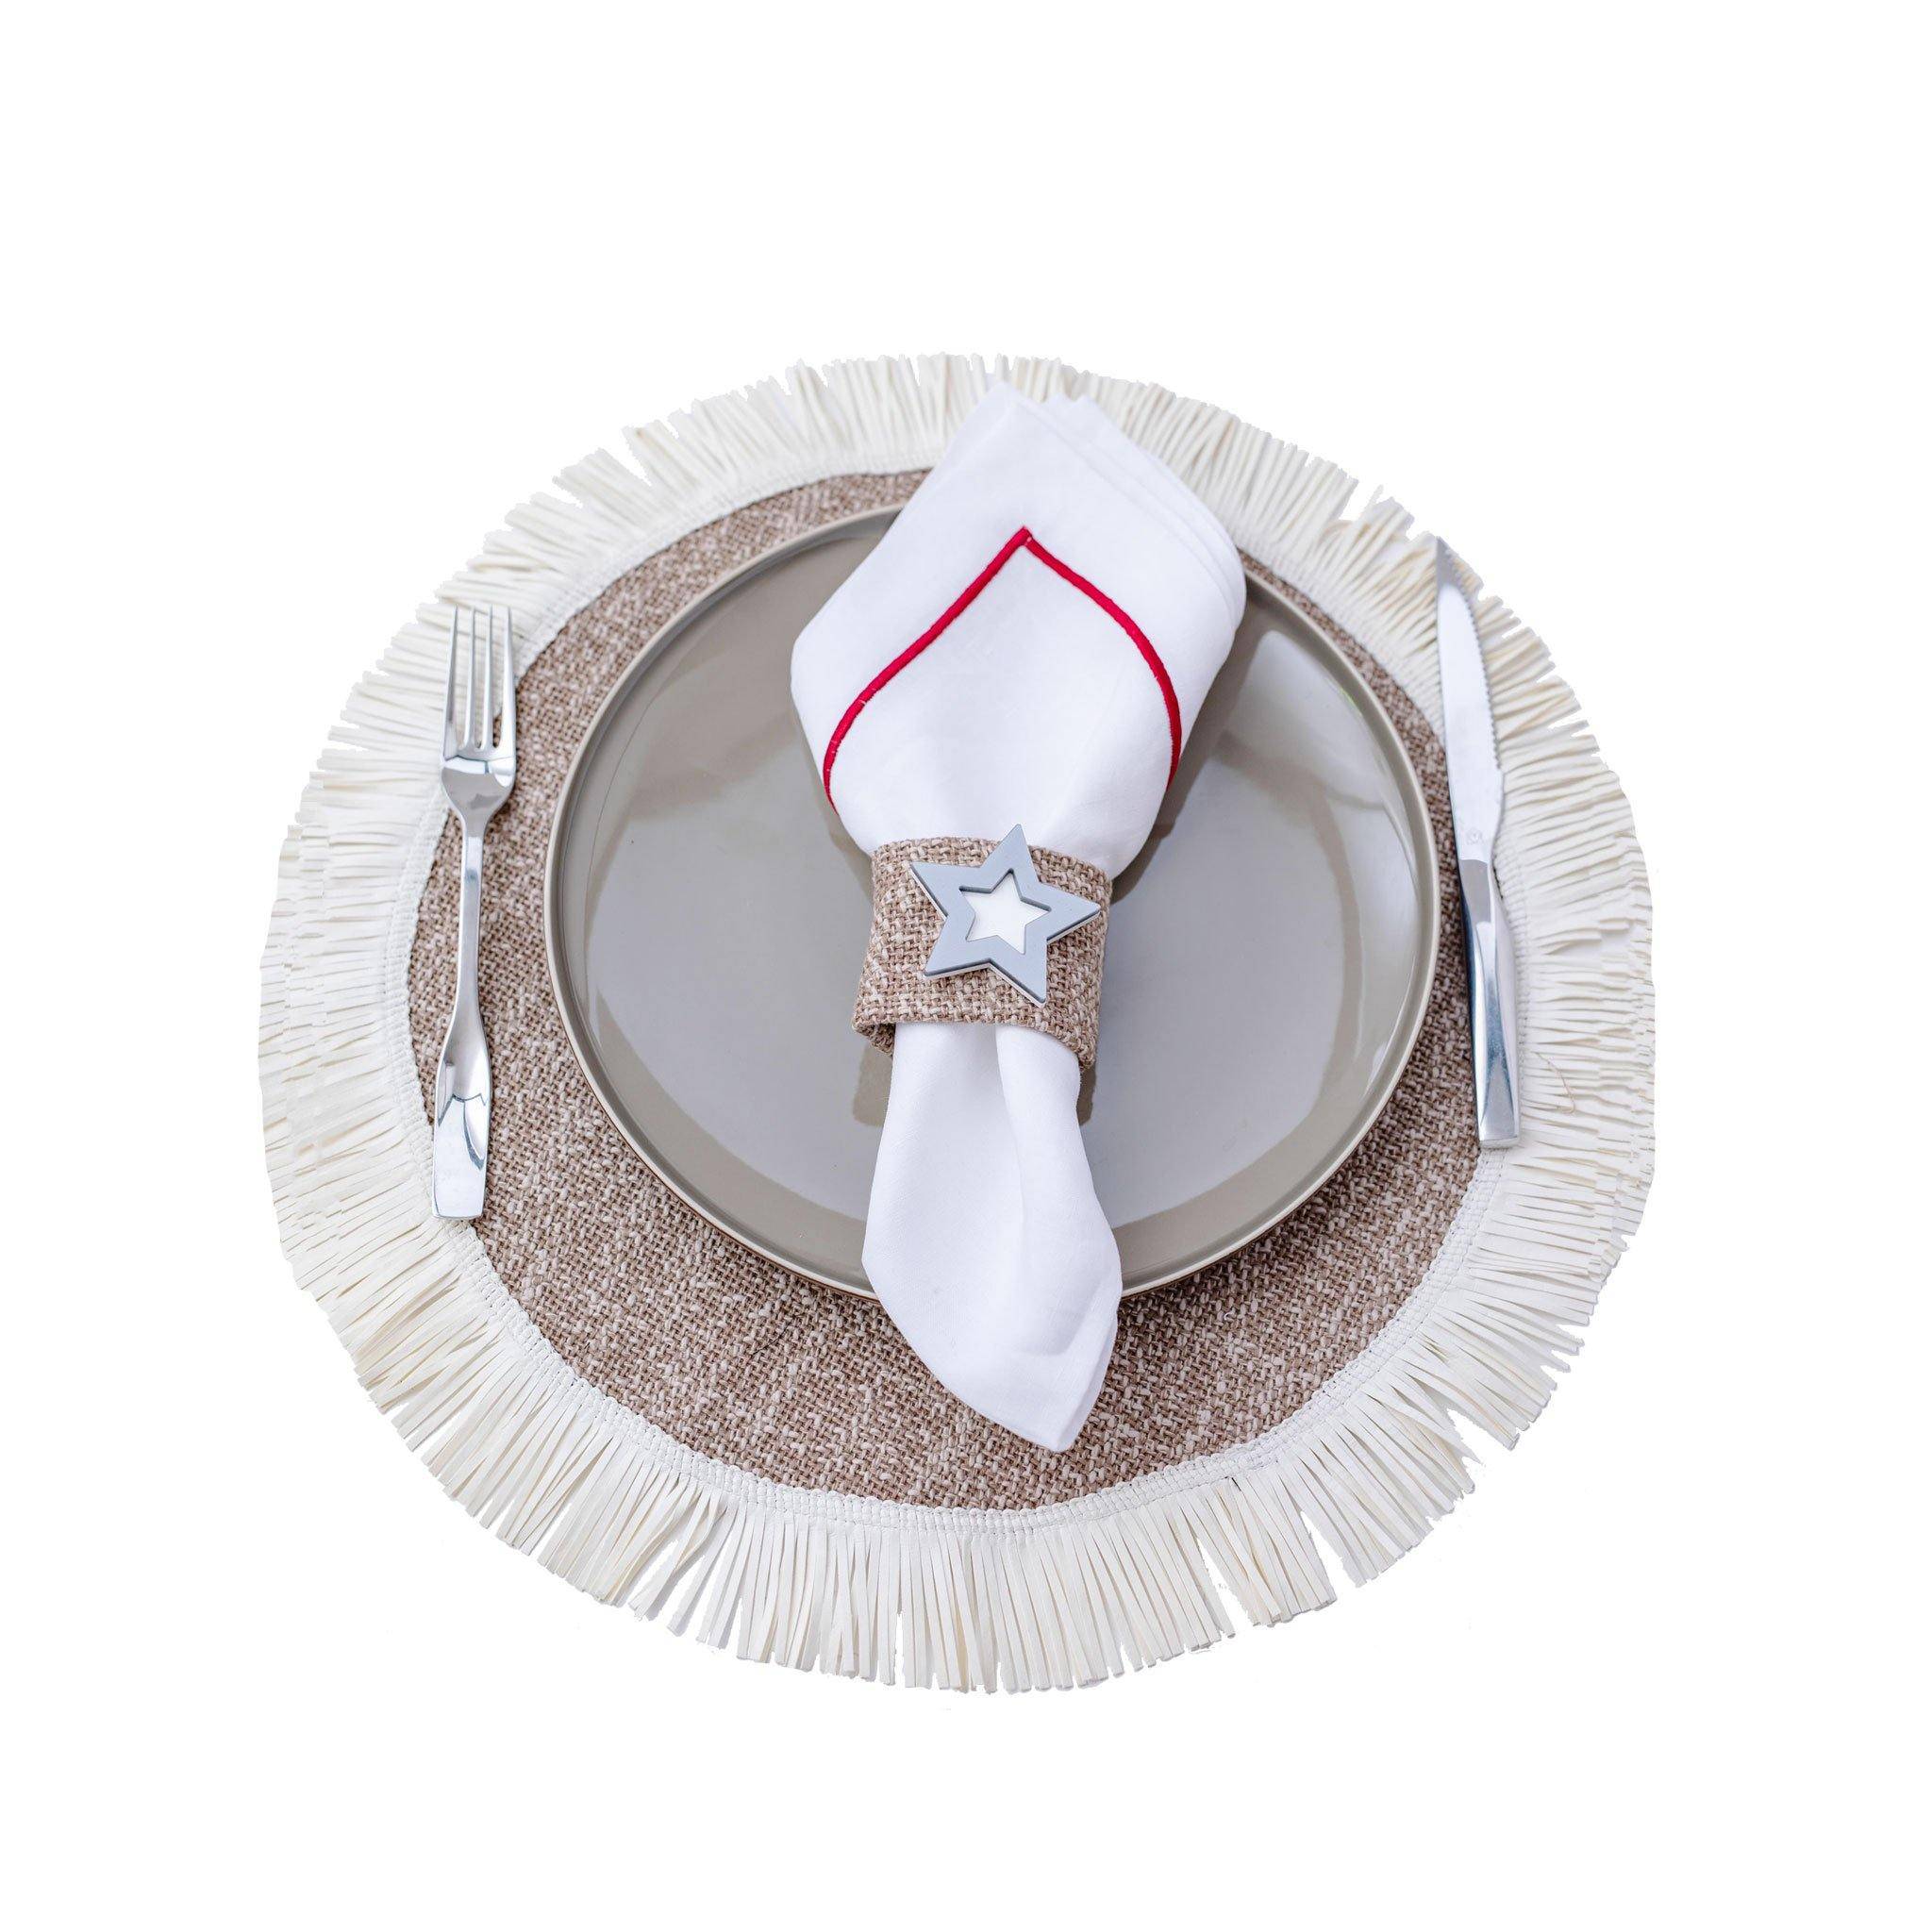 TABLE PLACEMATS | WOVEN EFFECT